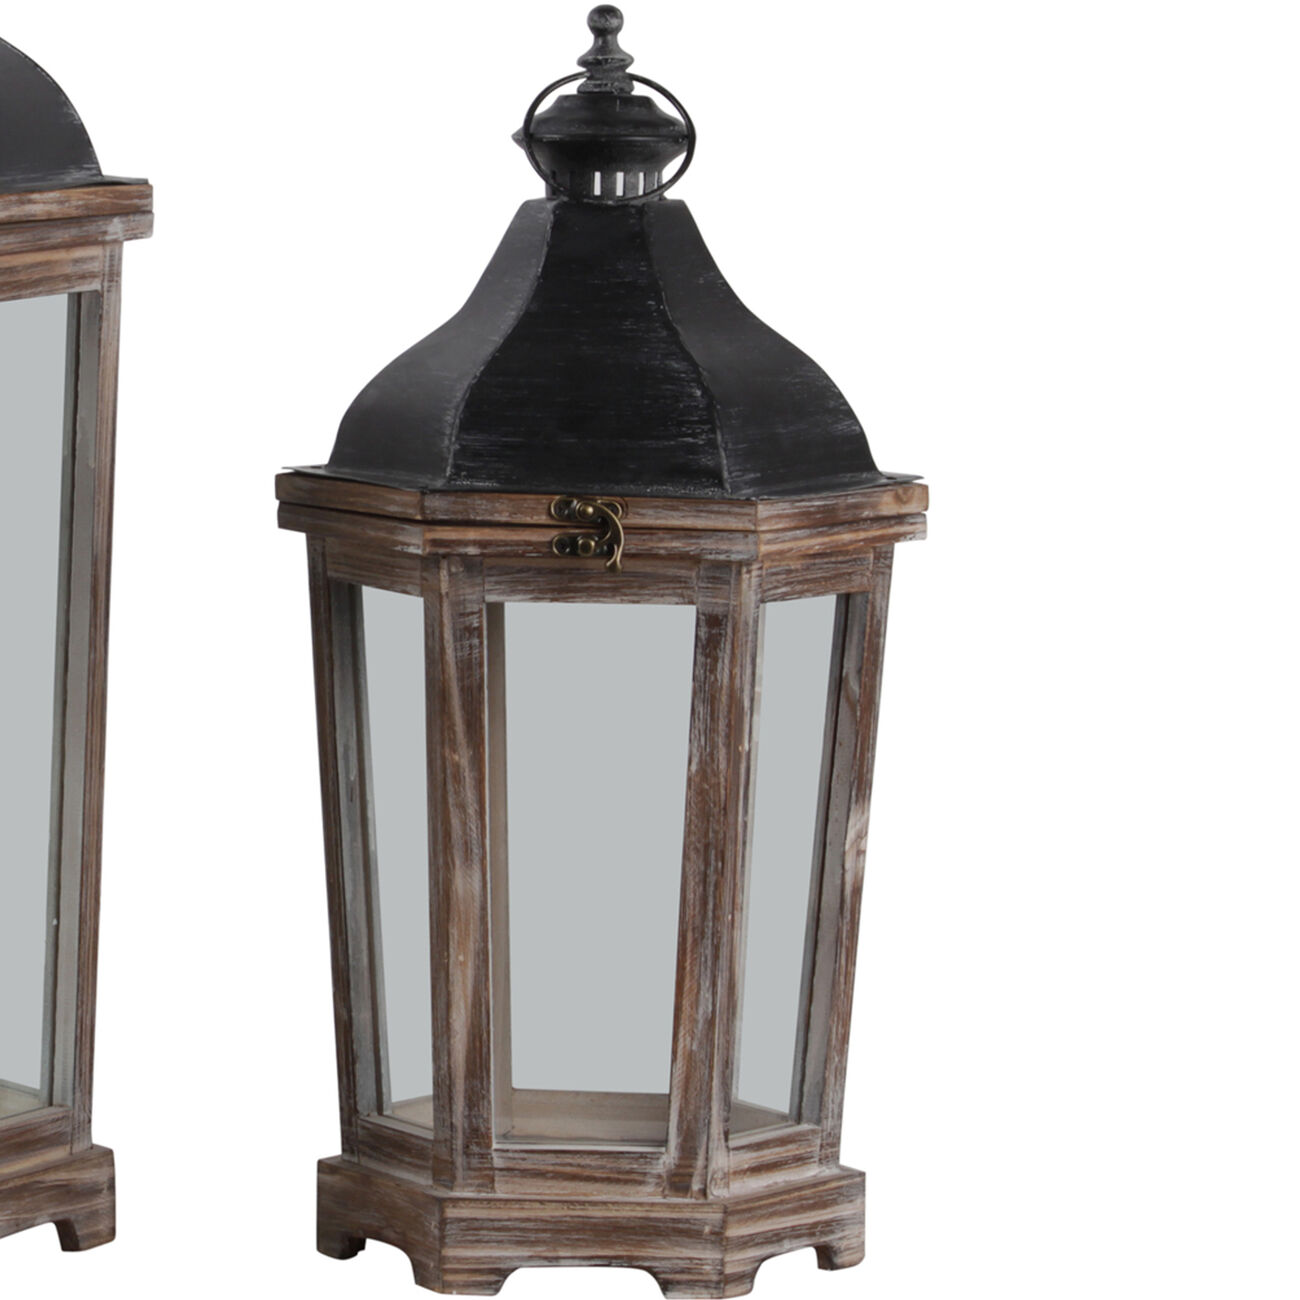 Wood and Metal Lanterns with Ring Handle, Brown and Black, Set of 2